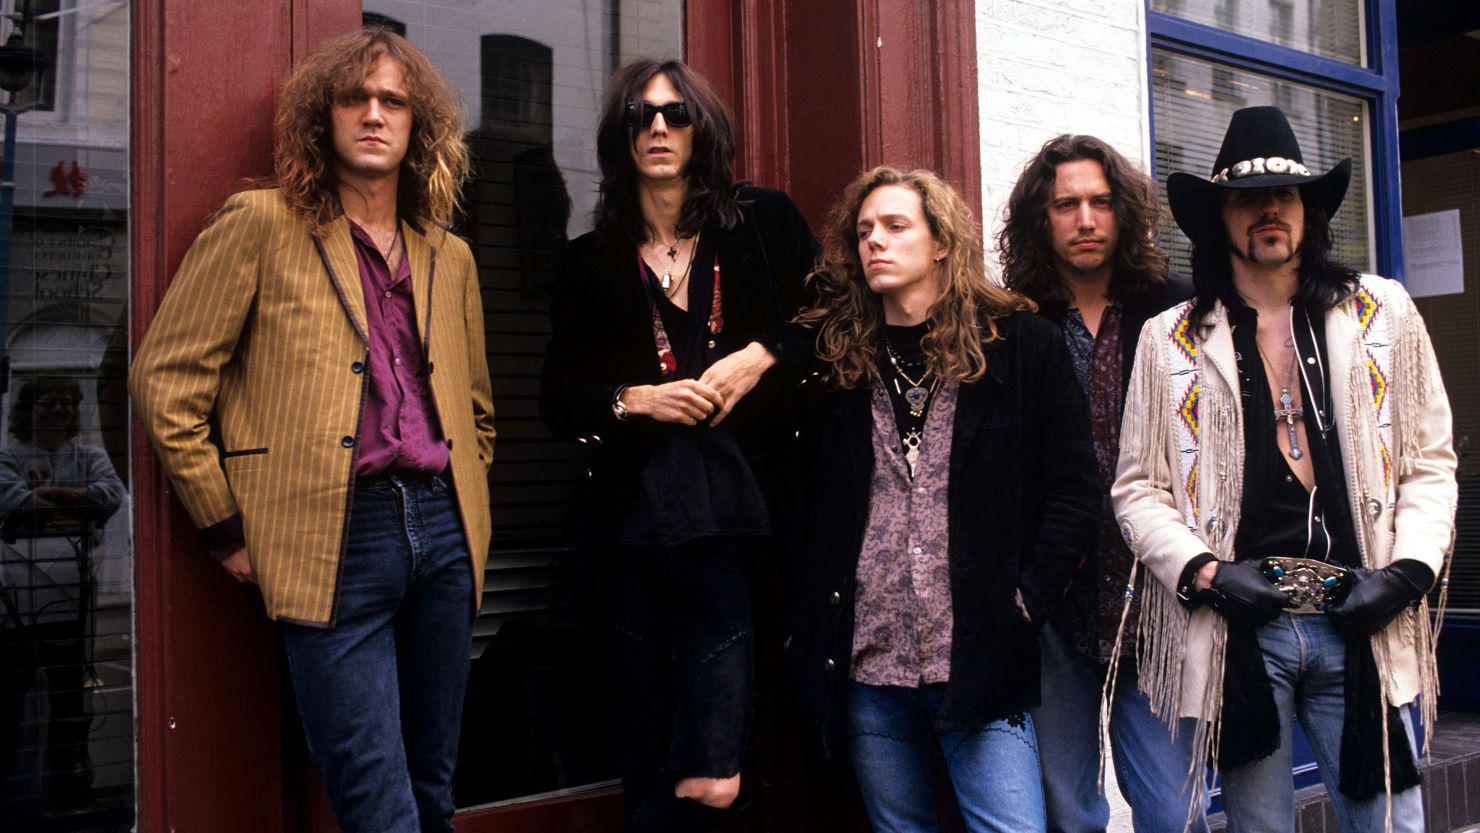 The Black Crowes are going on tour to mark the 30th anniversary of "Shake Your Money Maker."